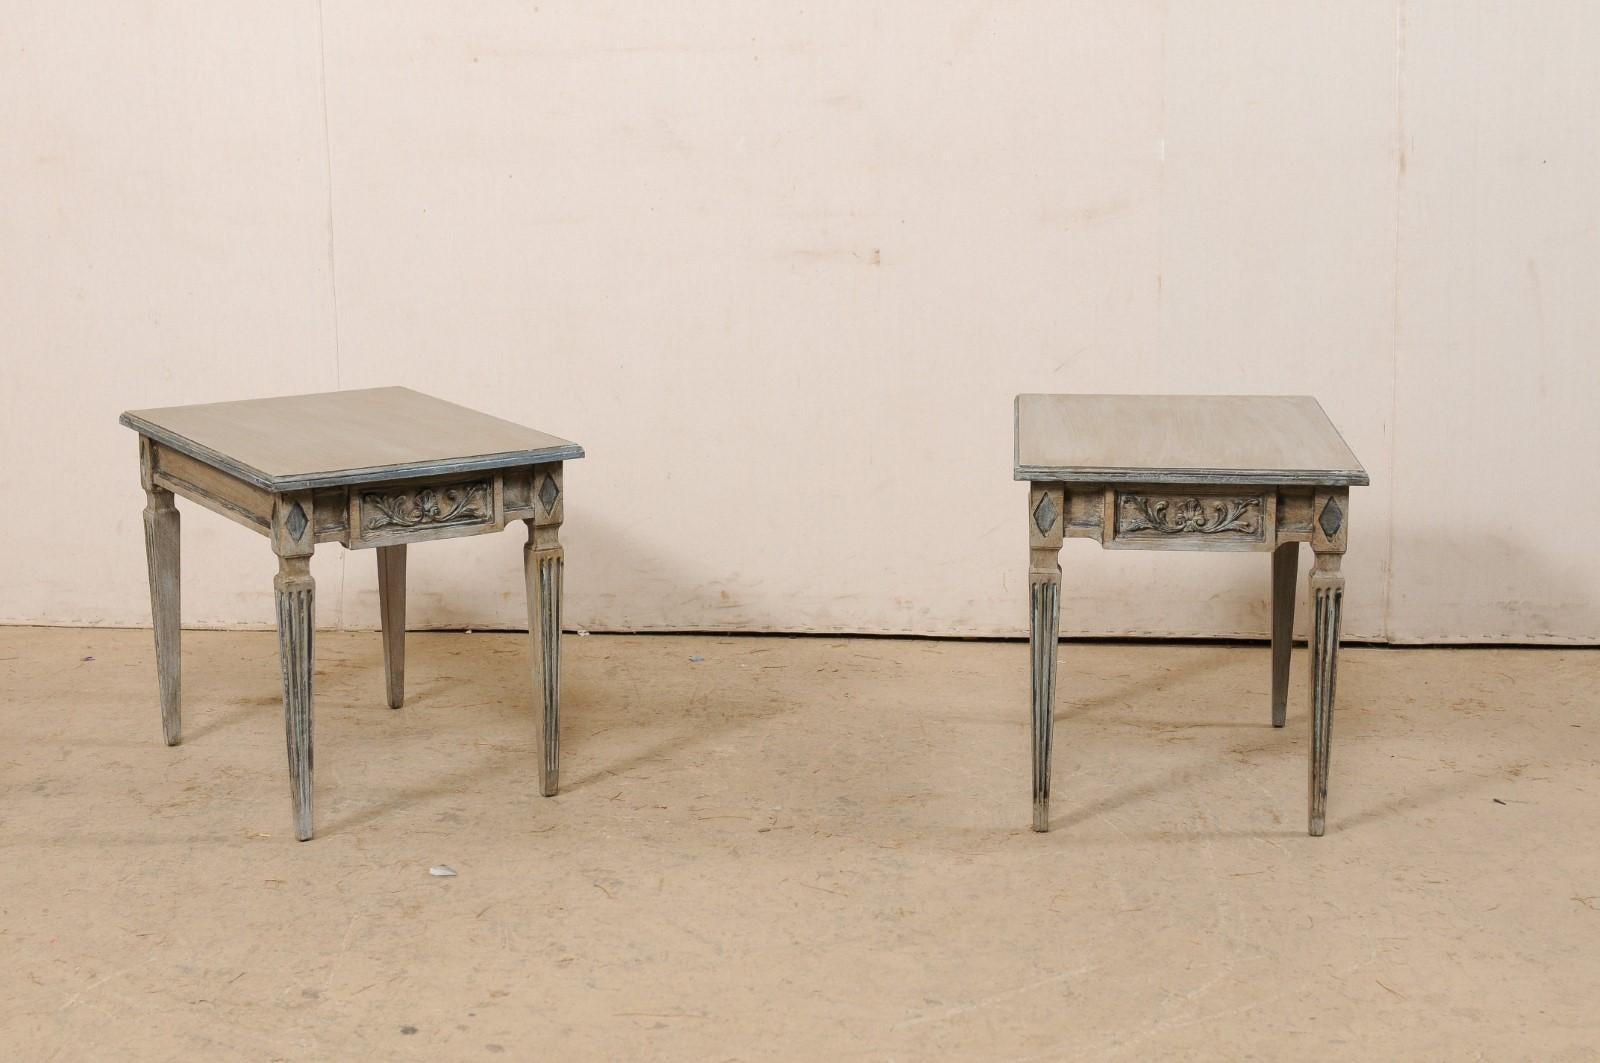 An Italian pair of carved and painted wood side tables. This vintage pair of tables from Italy each have rectangular-shaped tops, which overhang an apron below cared with diamond accents above the legs at each corner, and emphasis on a drop down